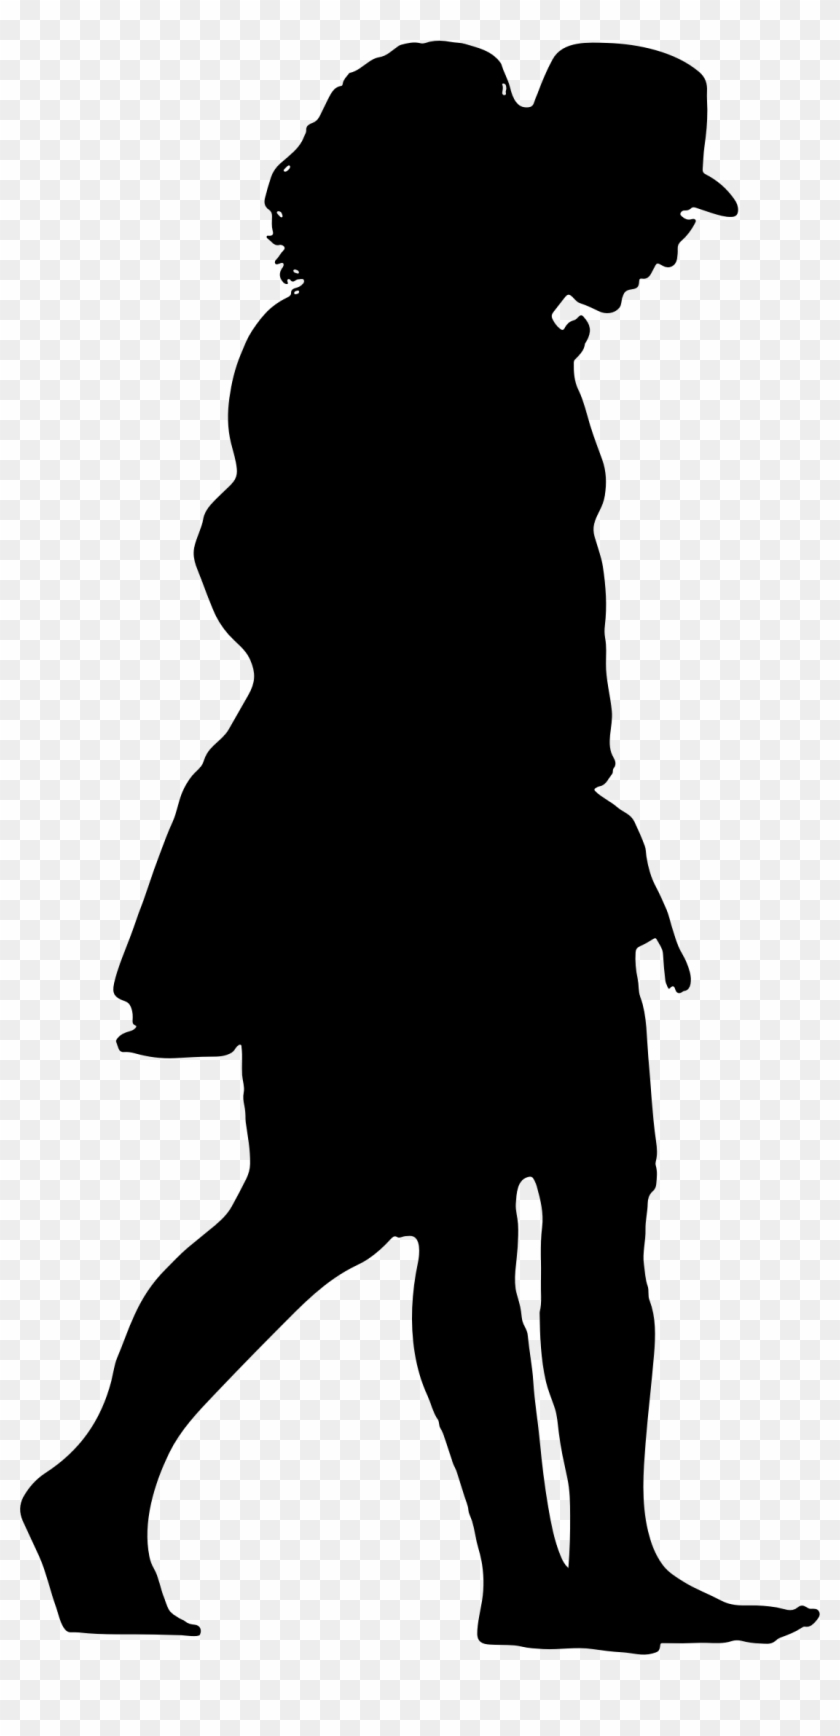 Couple Walking Silhouette - Couple Walking Silhouette Png #198869